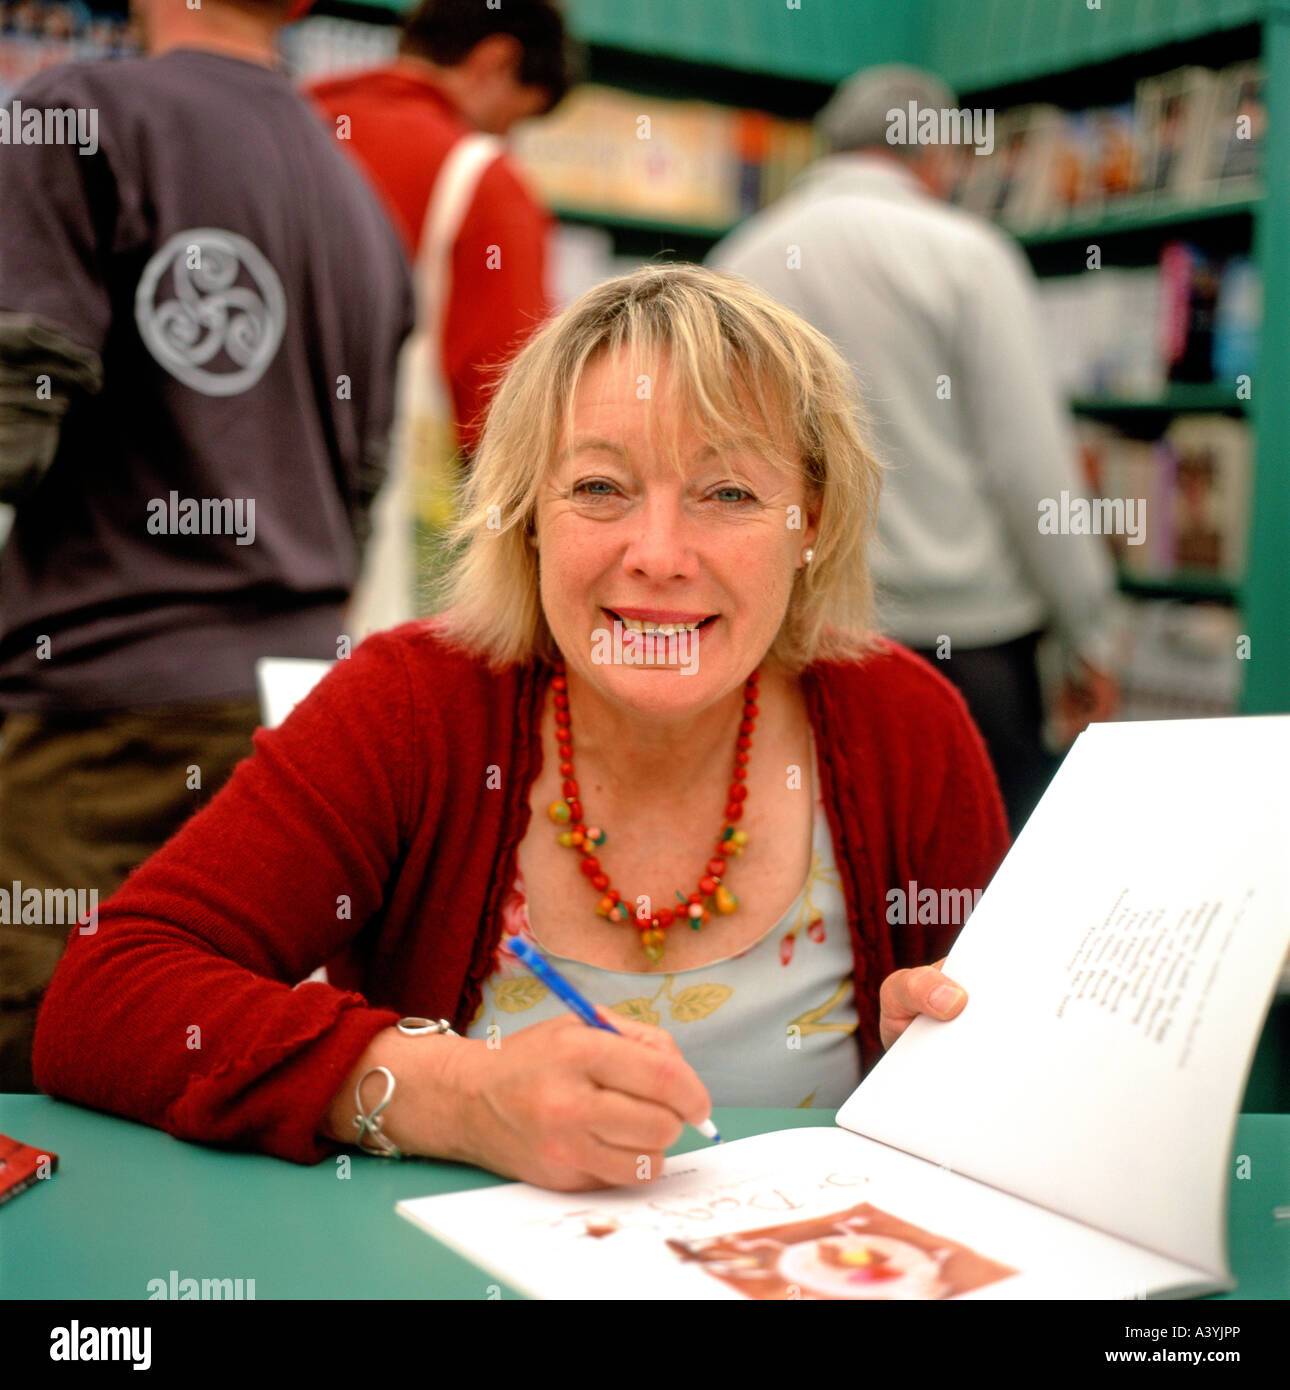 Childrens writer Babette Cole author of Mummy Laid An Egg! & kids books  book signing in bookshop at the Hay Festival, Hay-on-Wye, UK  KATHY DEWITT Stock Photo